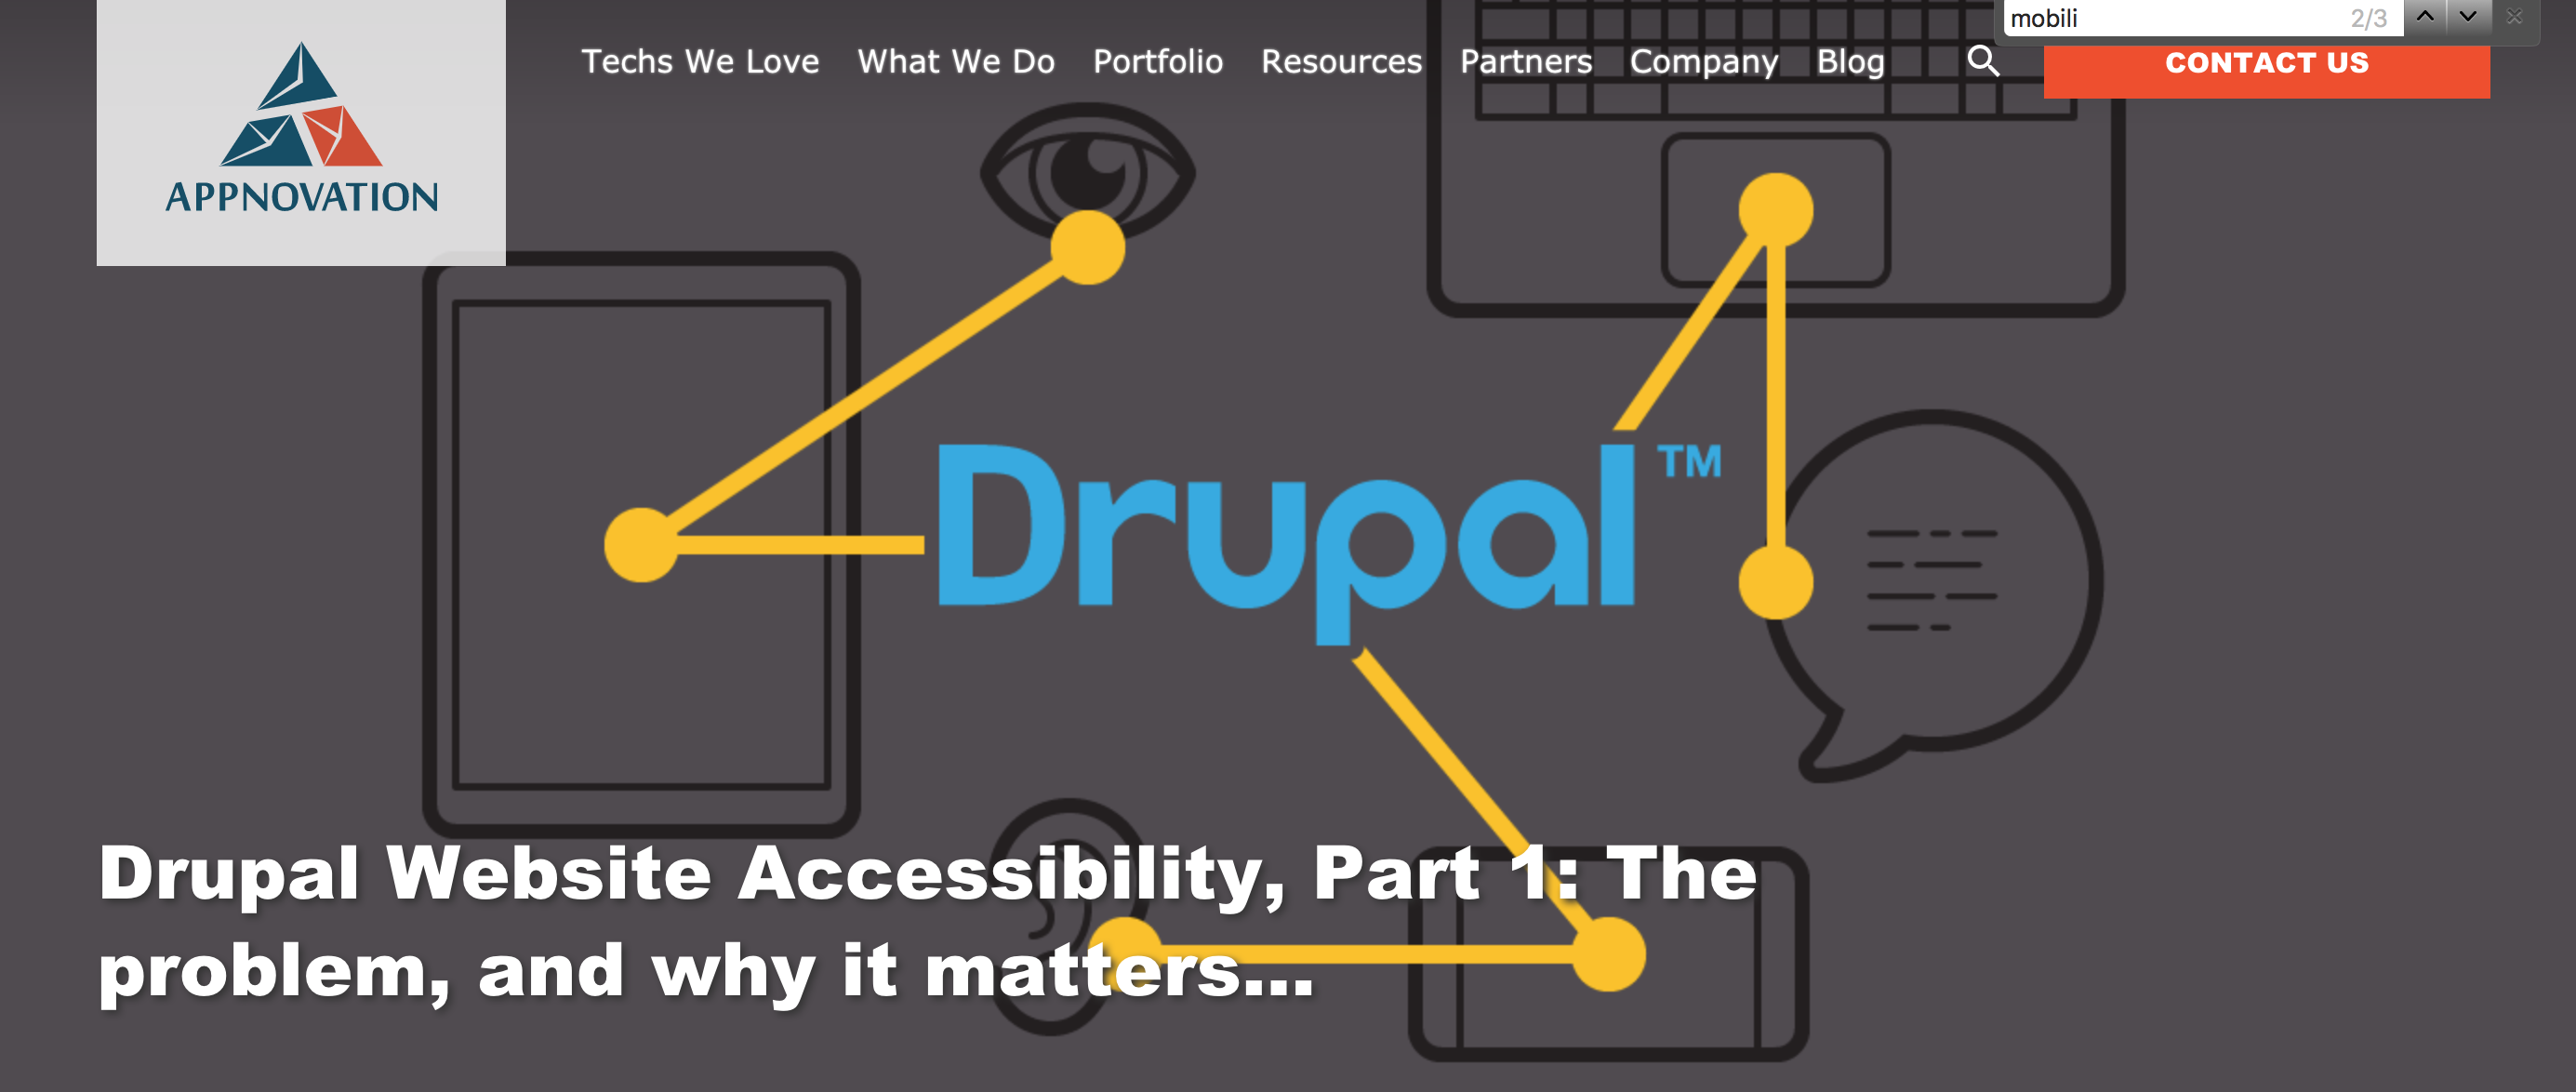  Drupal Website Accessibility, Part 1: The problem, and why it matters…